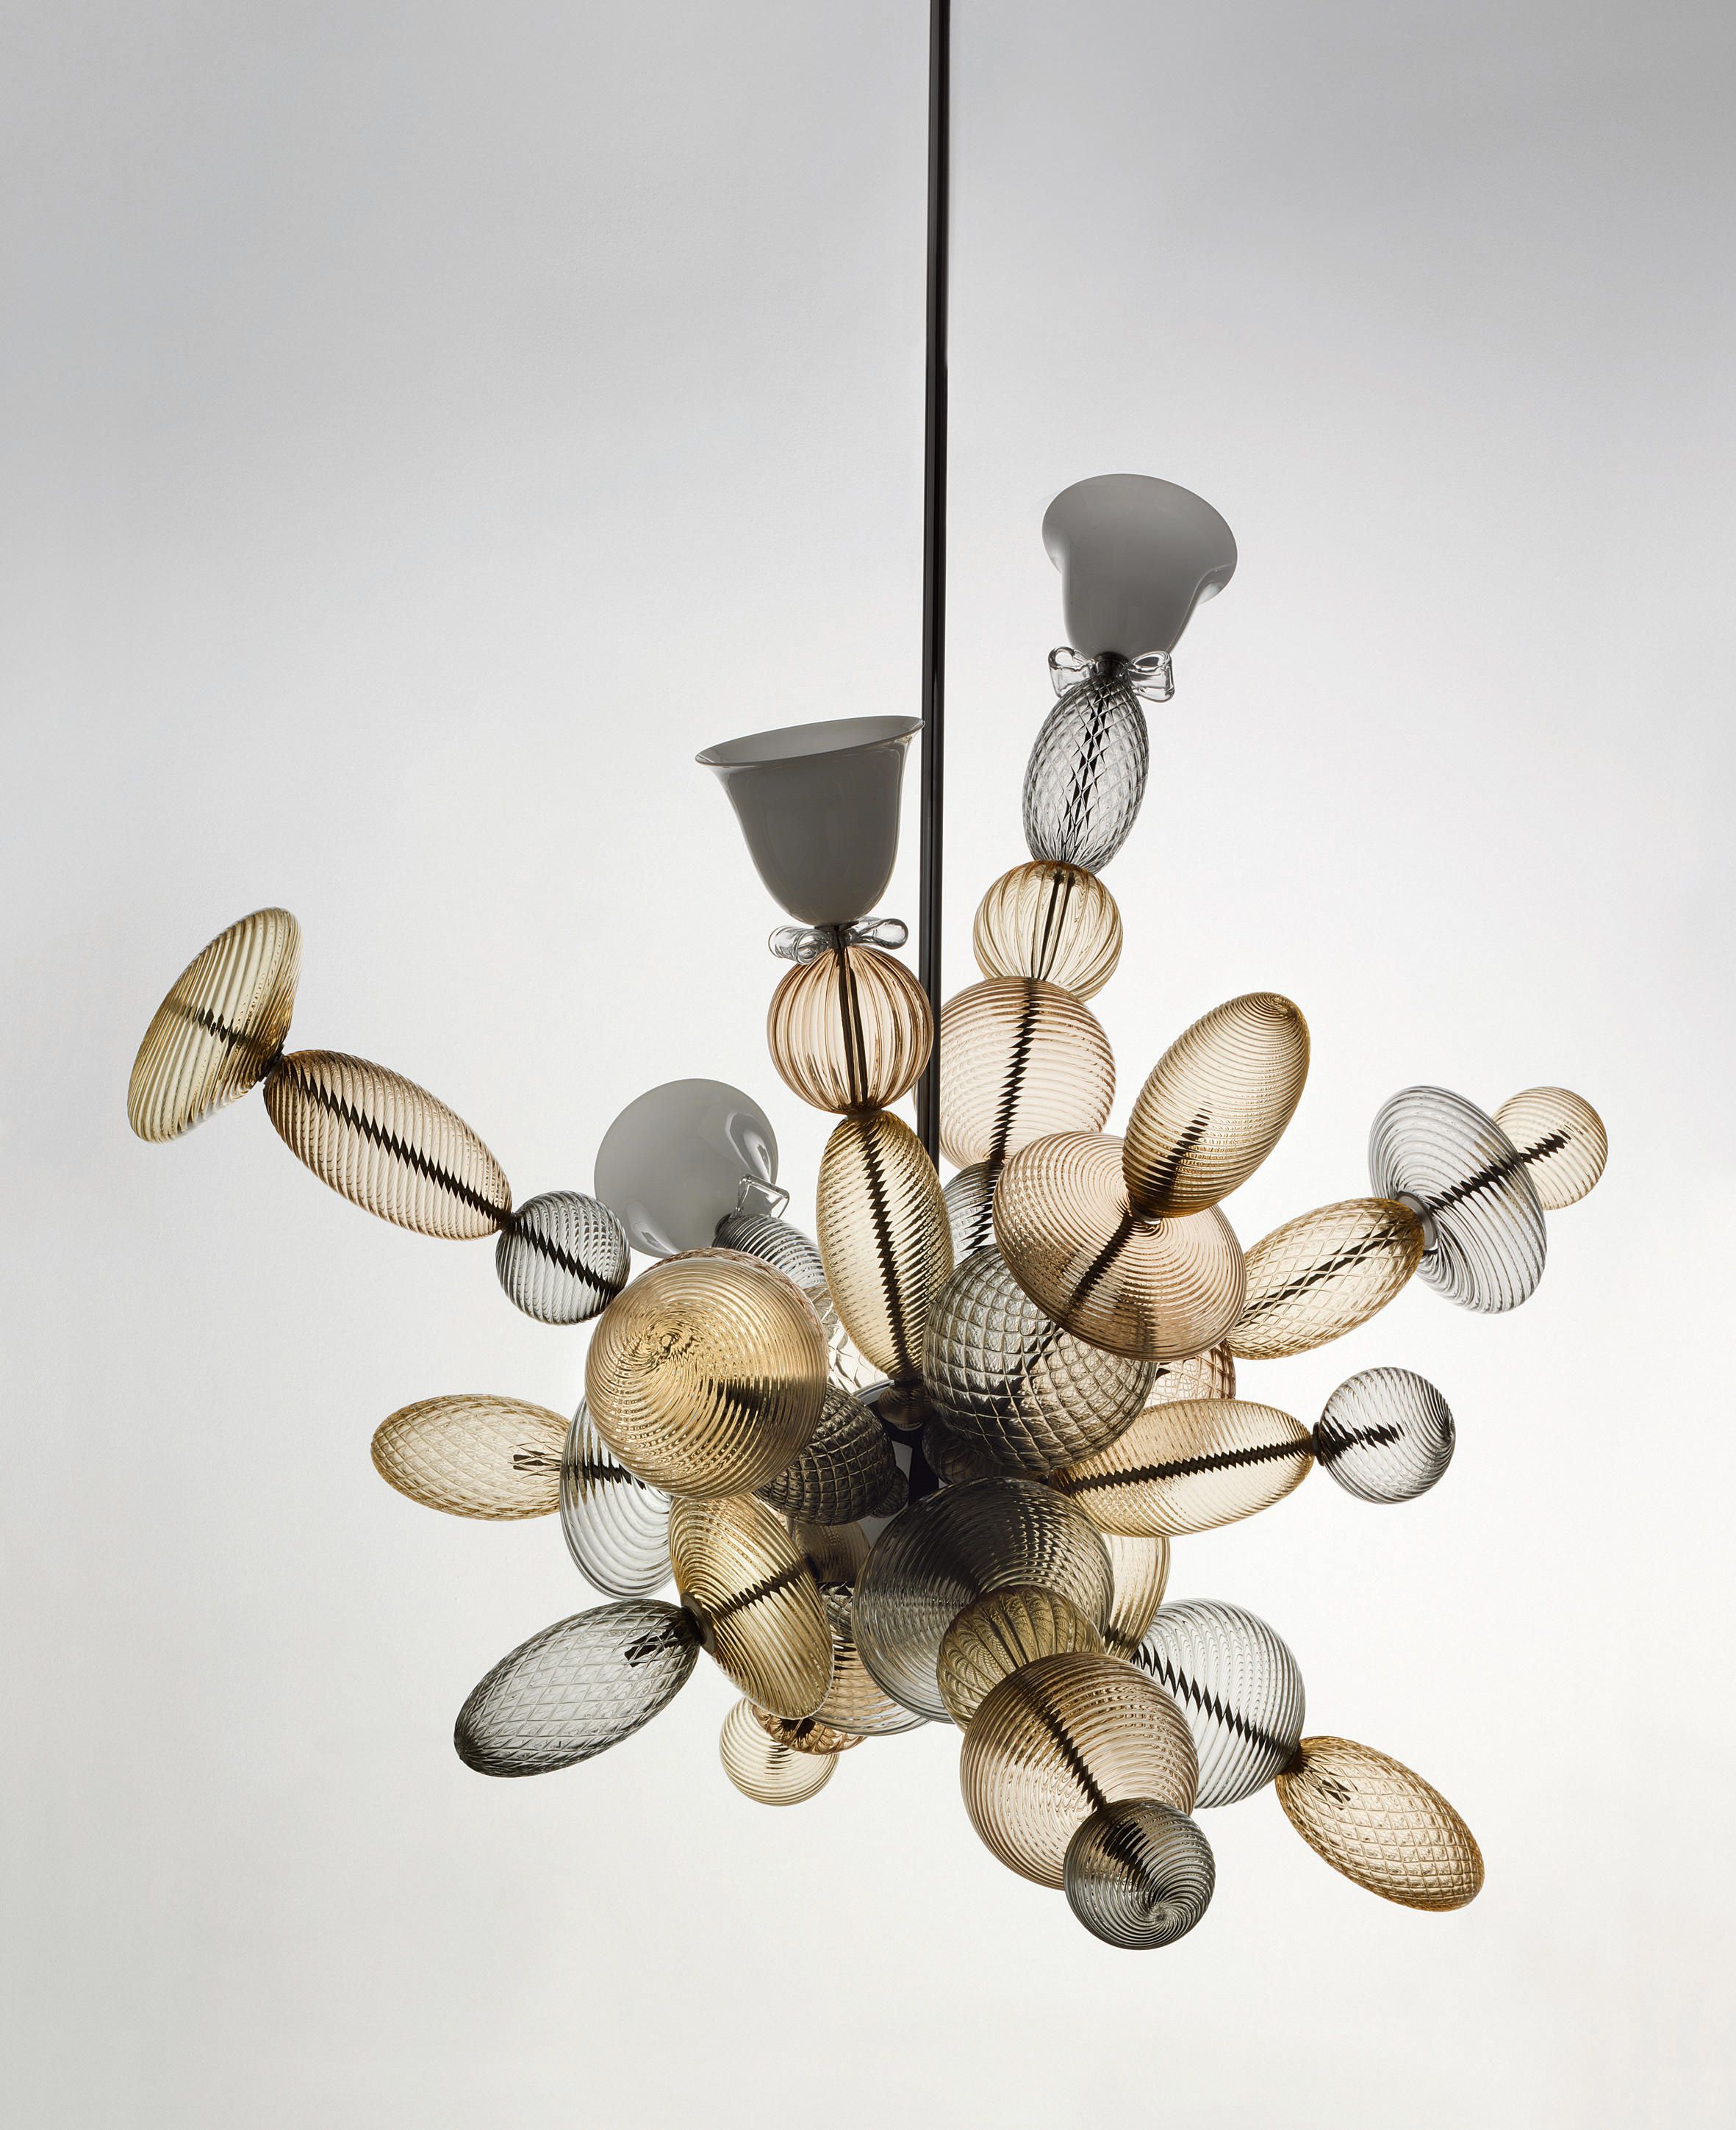 Perseus – Suspended Lights From Barovier&toso | Architonic Throughout Perseus 6 Light Candle Style Chandeliers (View 16 of 30)